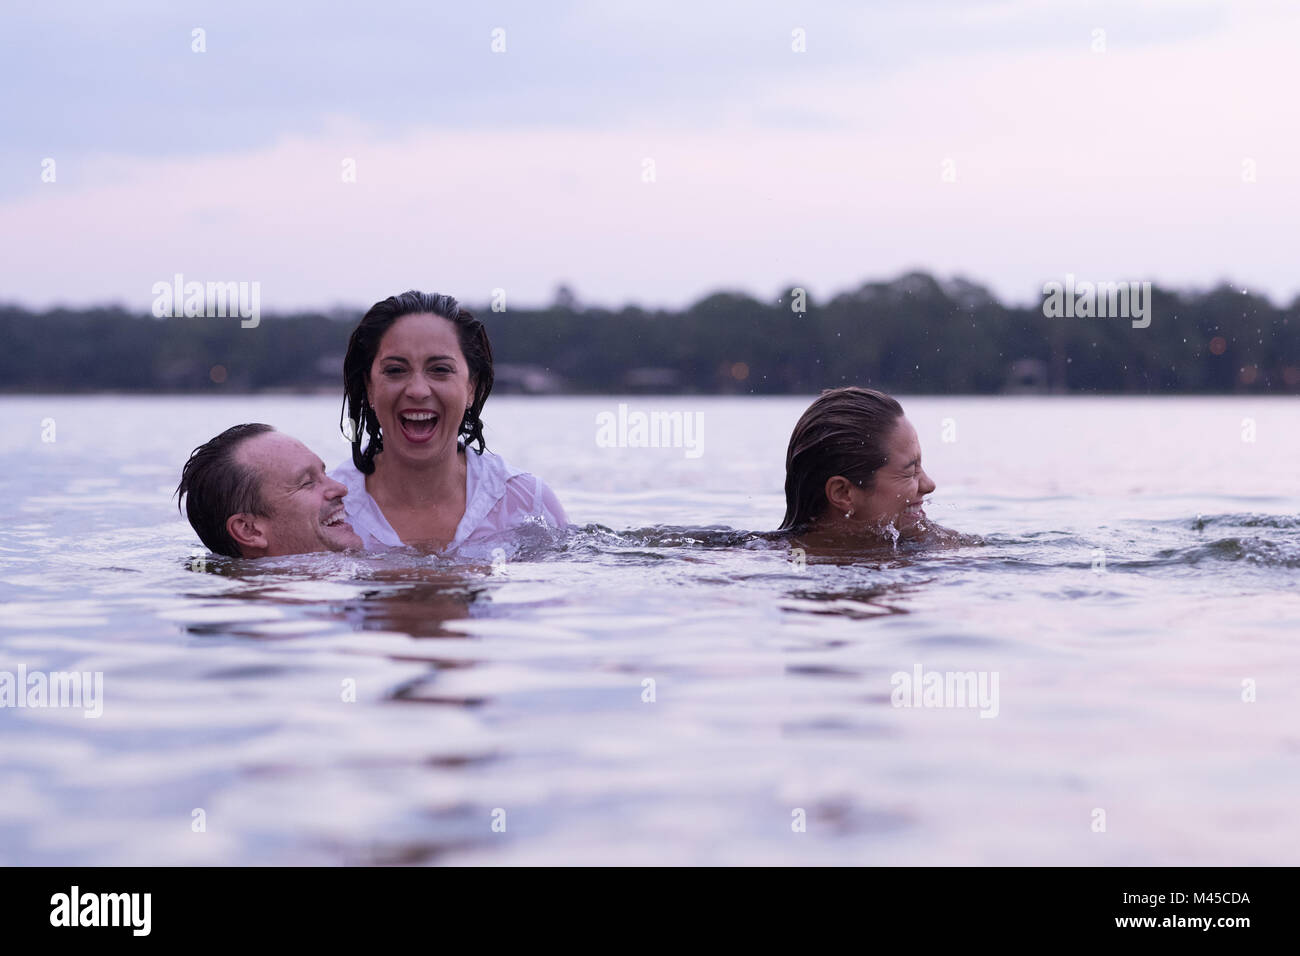 Clothed friends in water, Destin, Florida, United States, North America Stock Photo